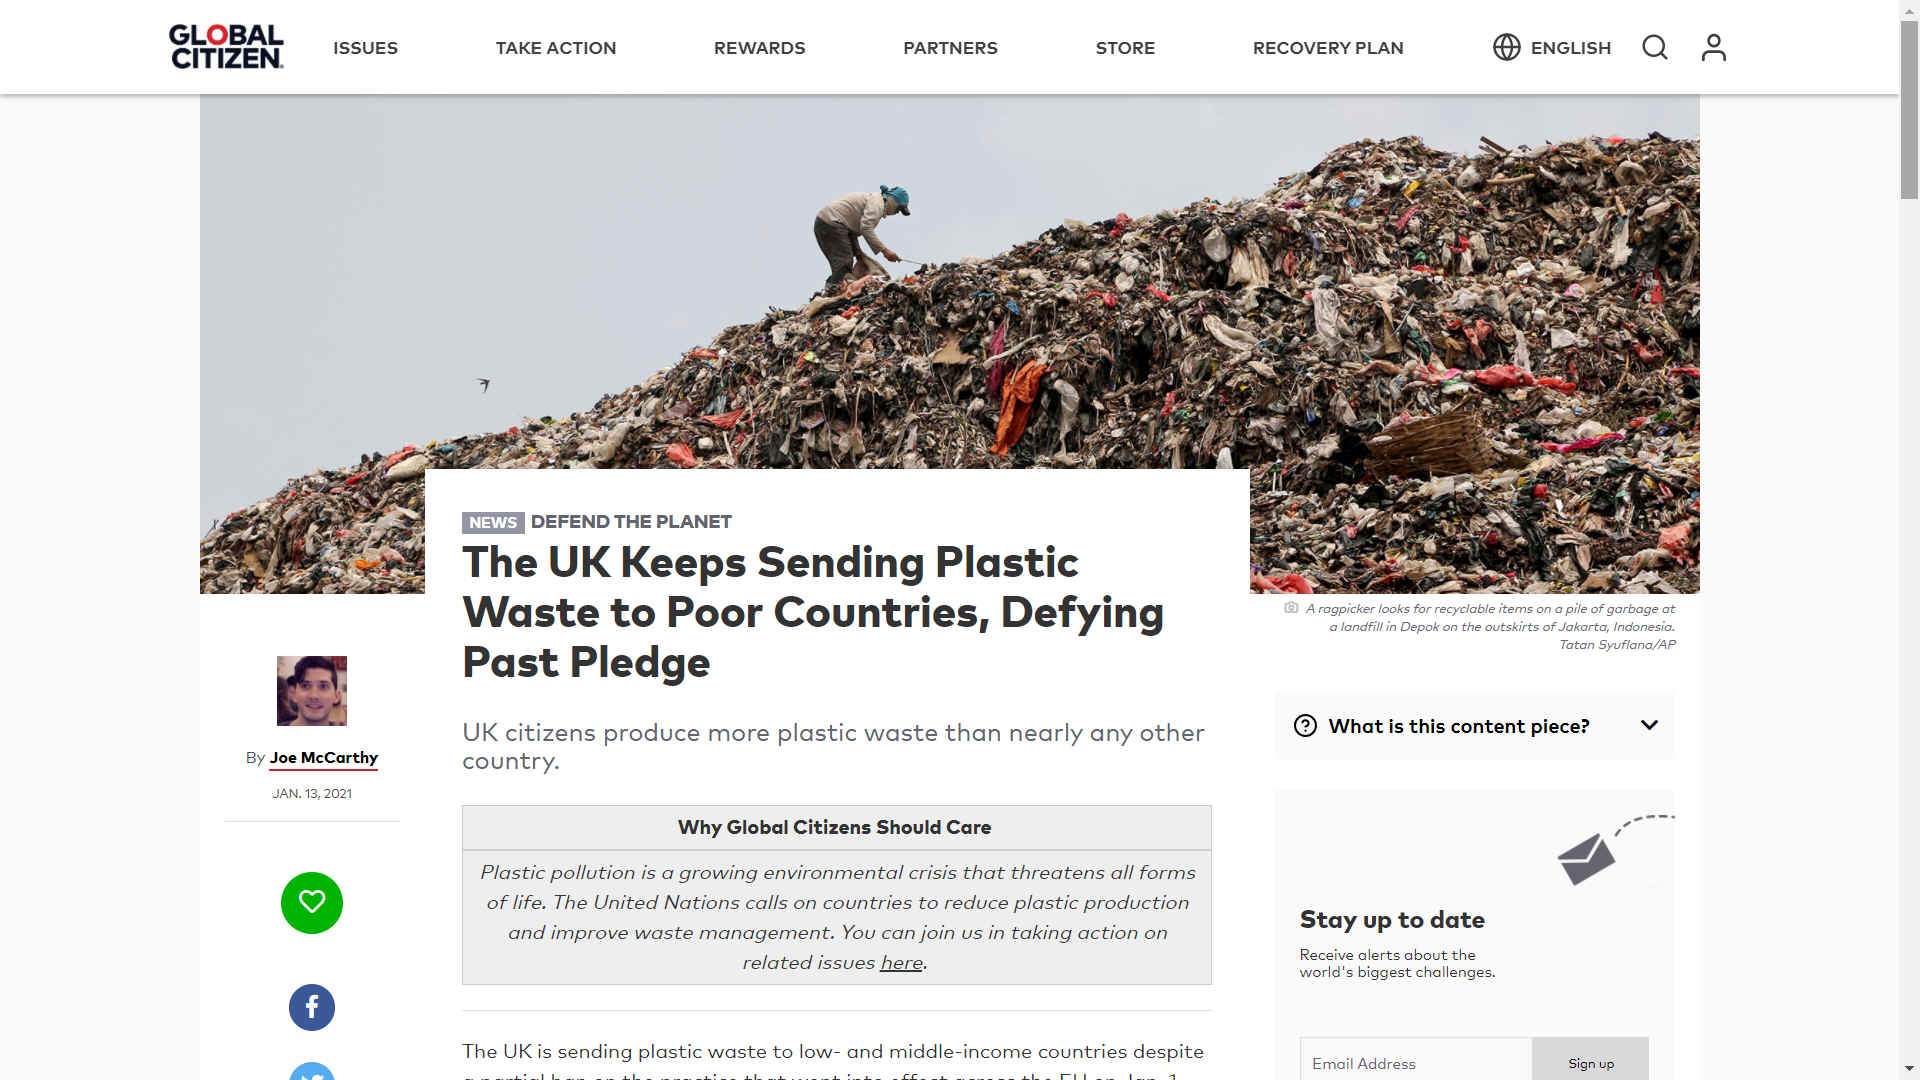 https://www.globalcitizen.org/en/content/uk-still-sends-plastic-waste-low-income-countries/